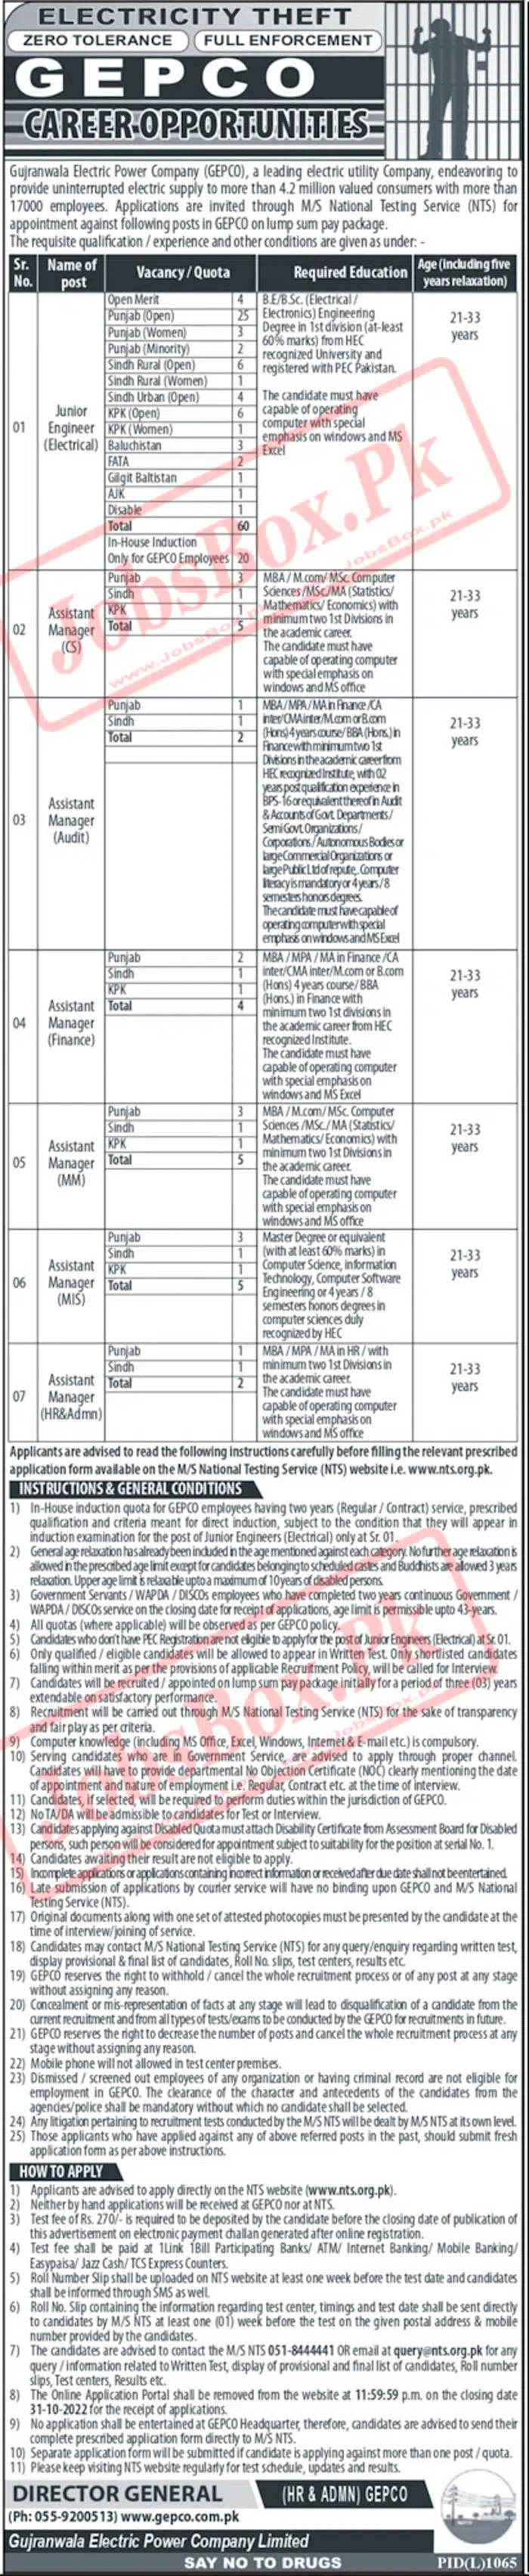 New GEPCO Jobs 2022 - Gujranwala Electric Supply Company Careers | Online Apply via NTS